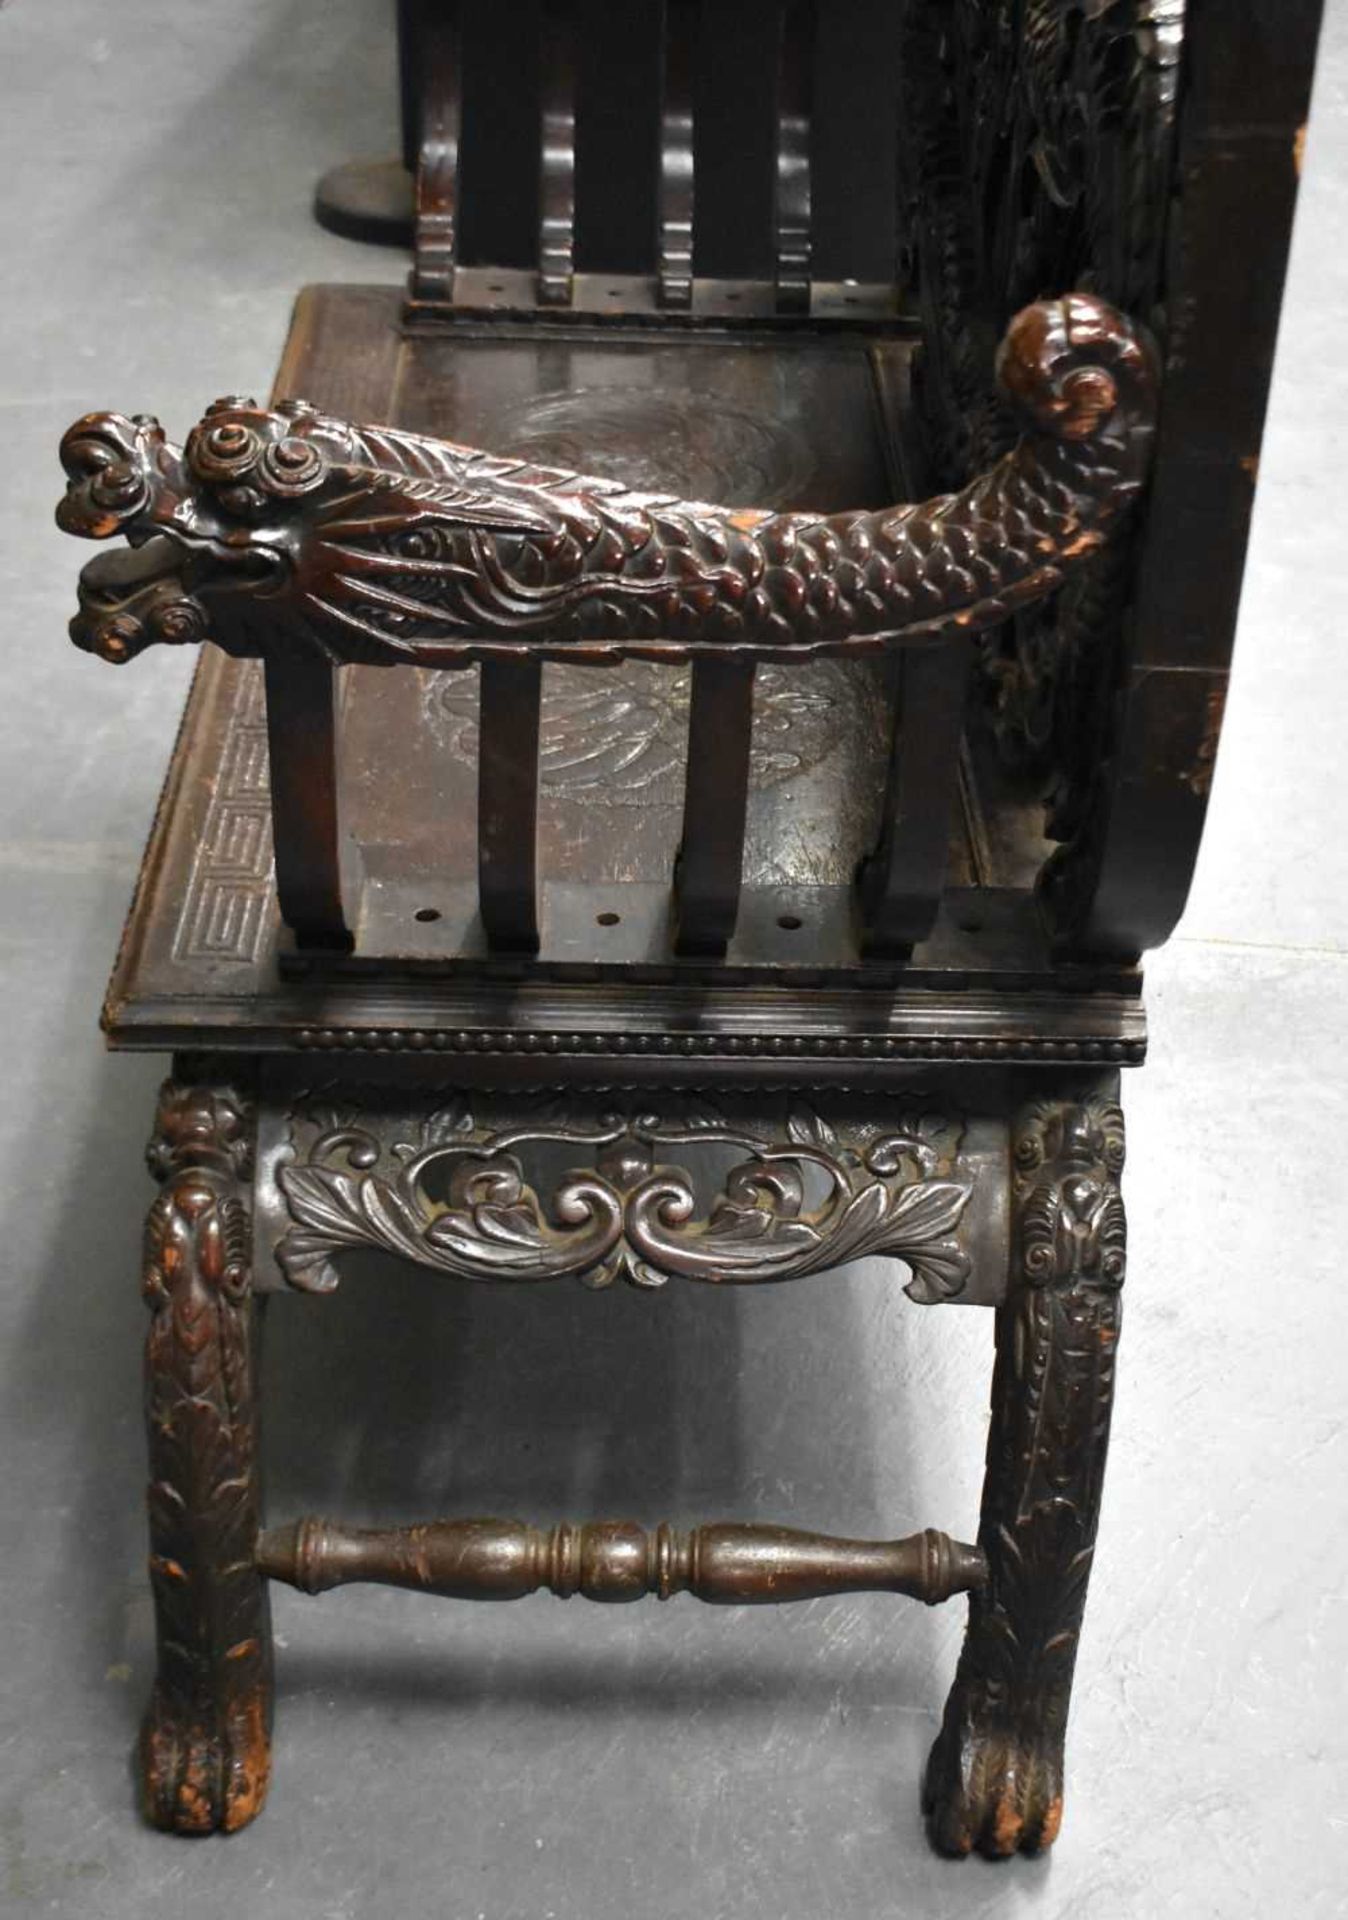 A LARGE 19TH CENTURY JAPANESE MEIJI PERIOD CARVED WOOD DRAGON BENCH. 125 cm x 125 cm. - Image 9 of 14